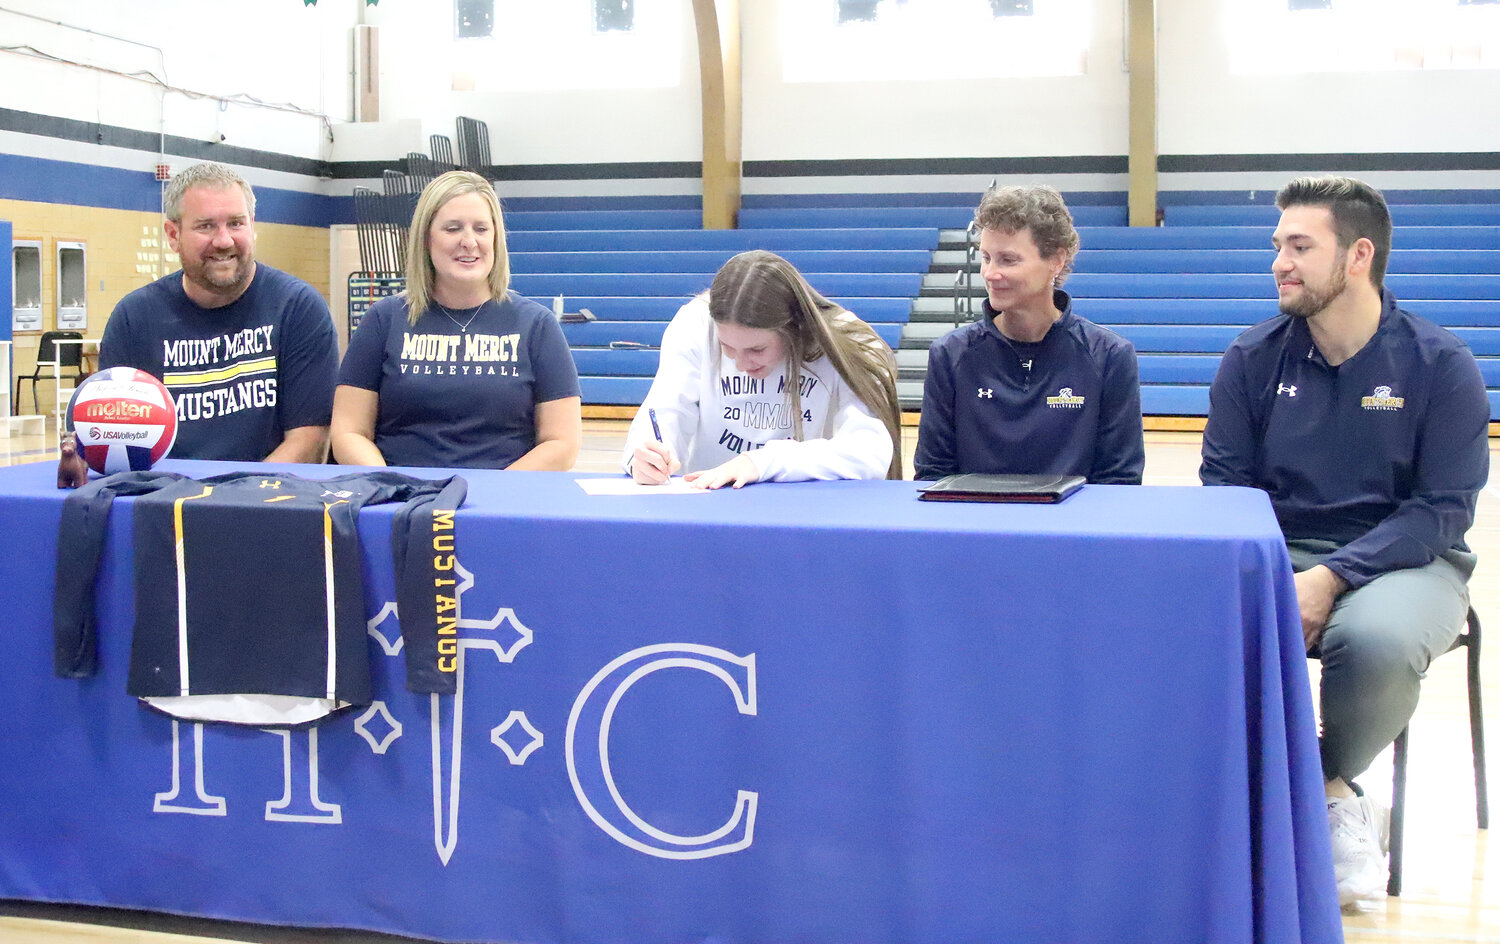 HTC senior Mary Kate Bendlage signs a letter with Mt. Mercy University to play volleyball for the Mustangs Wednesday in Fort Madison.